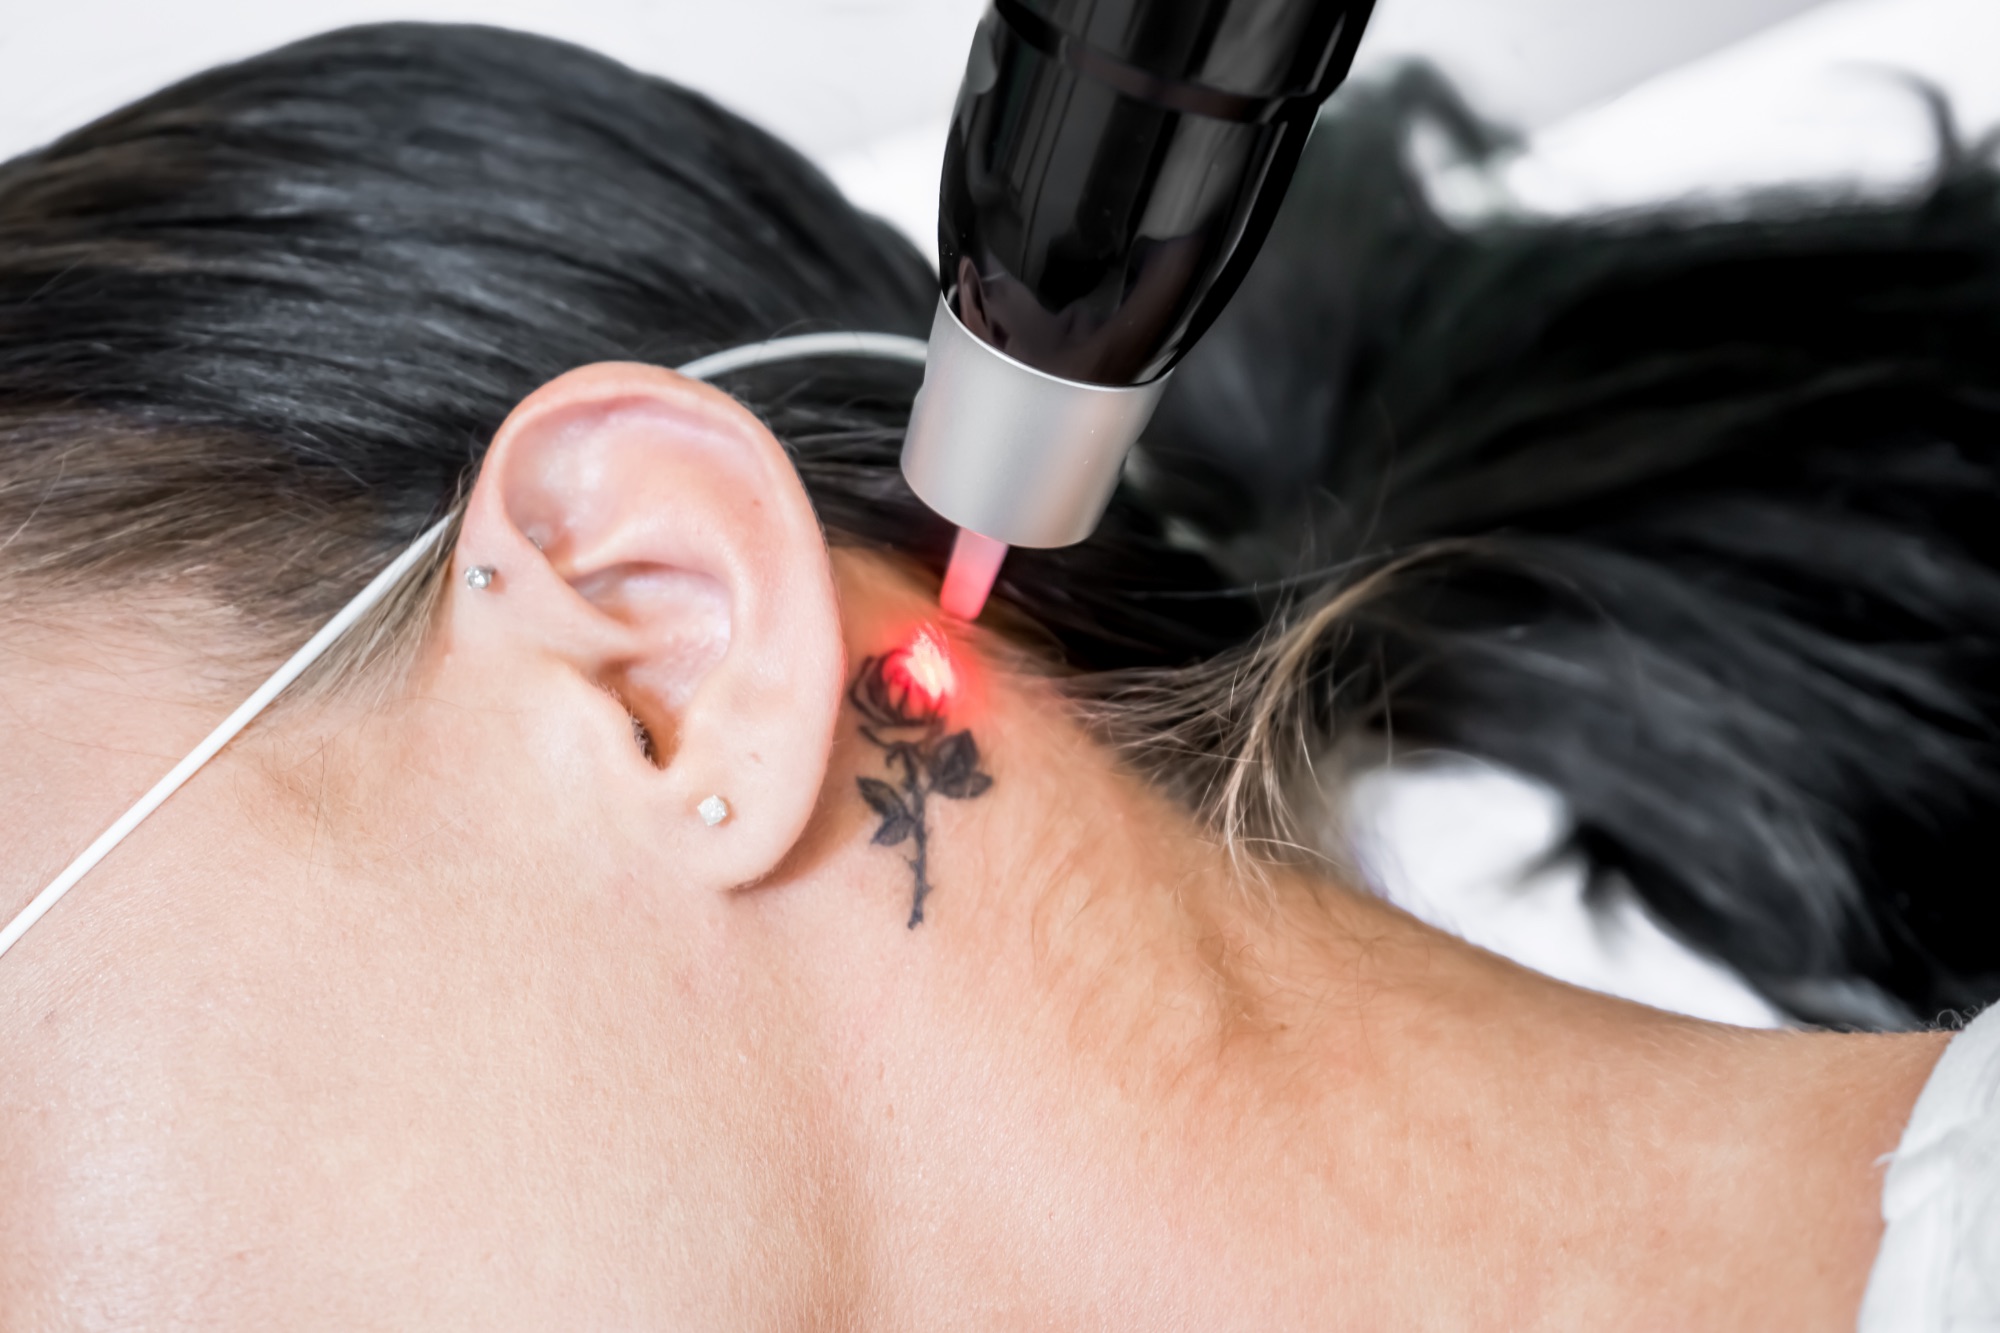 Laser Tattoo Removal of a small tattoo behind a woman's ear